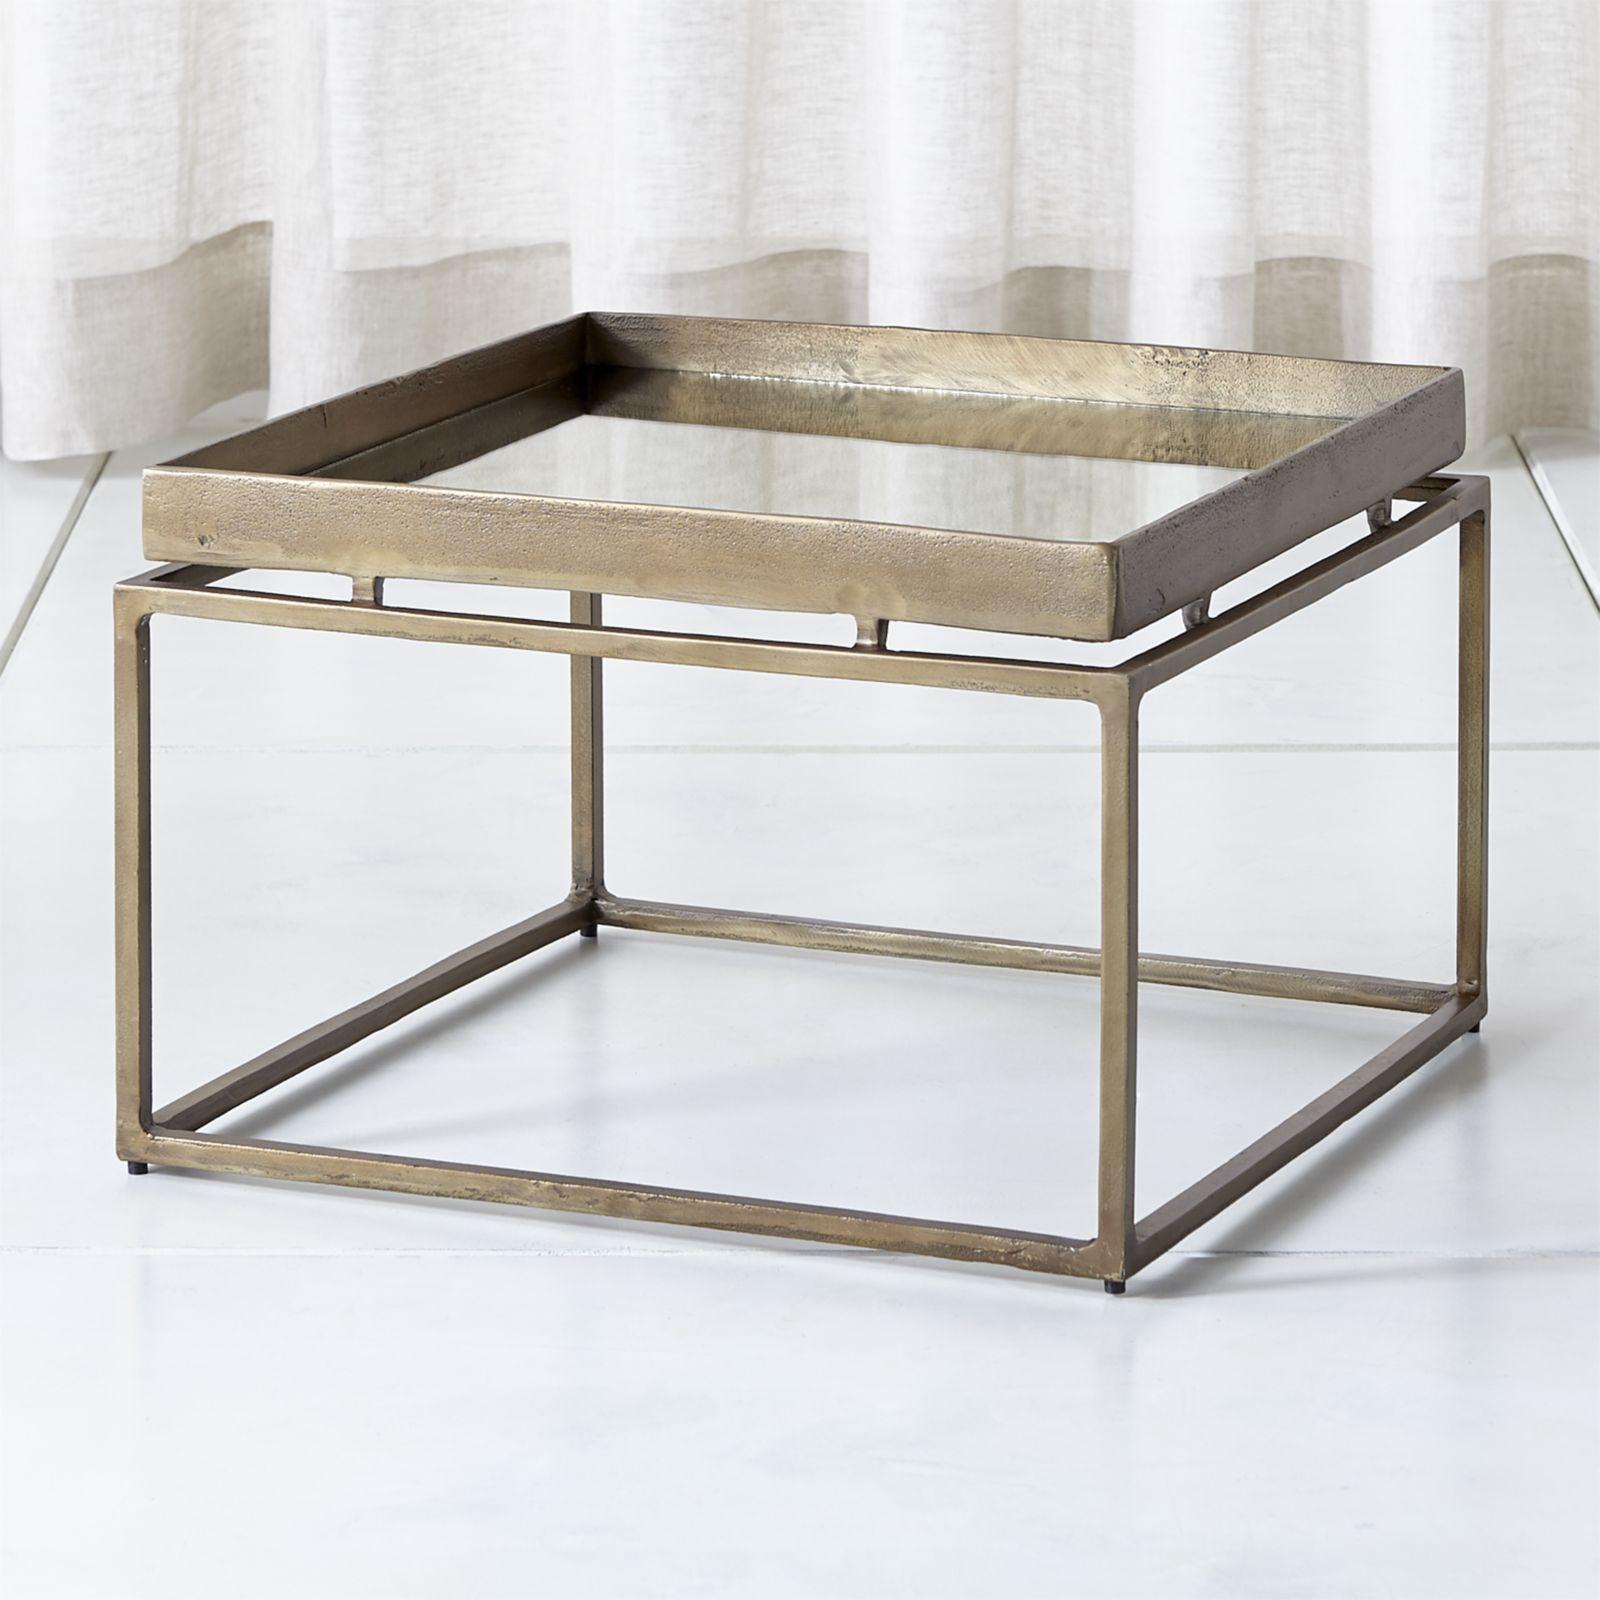 Crate And Barrel Echo Bunching Table Zola